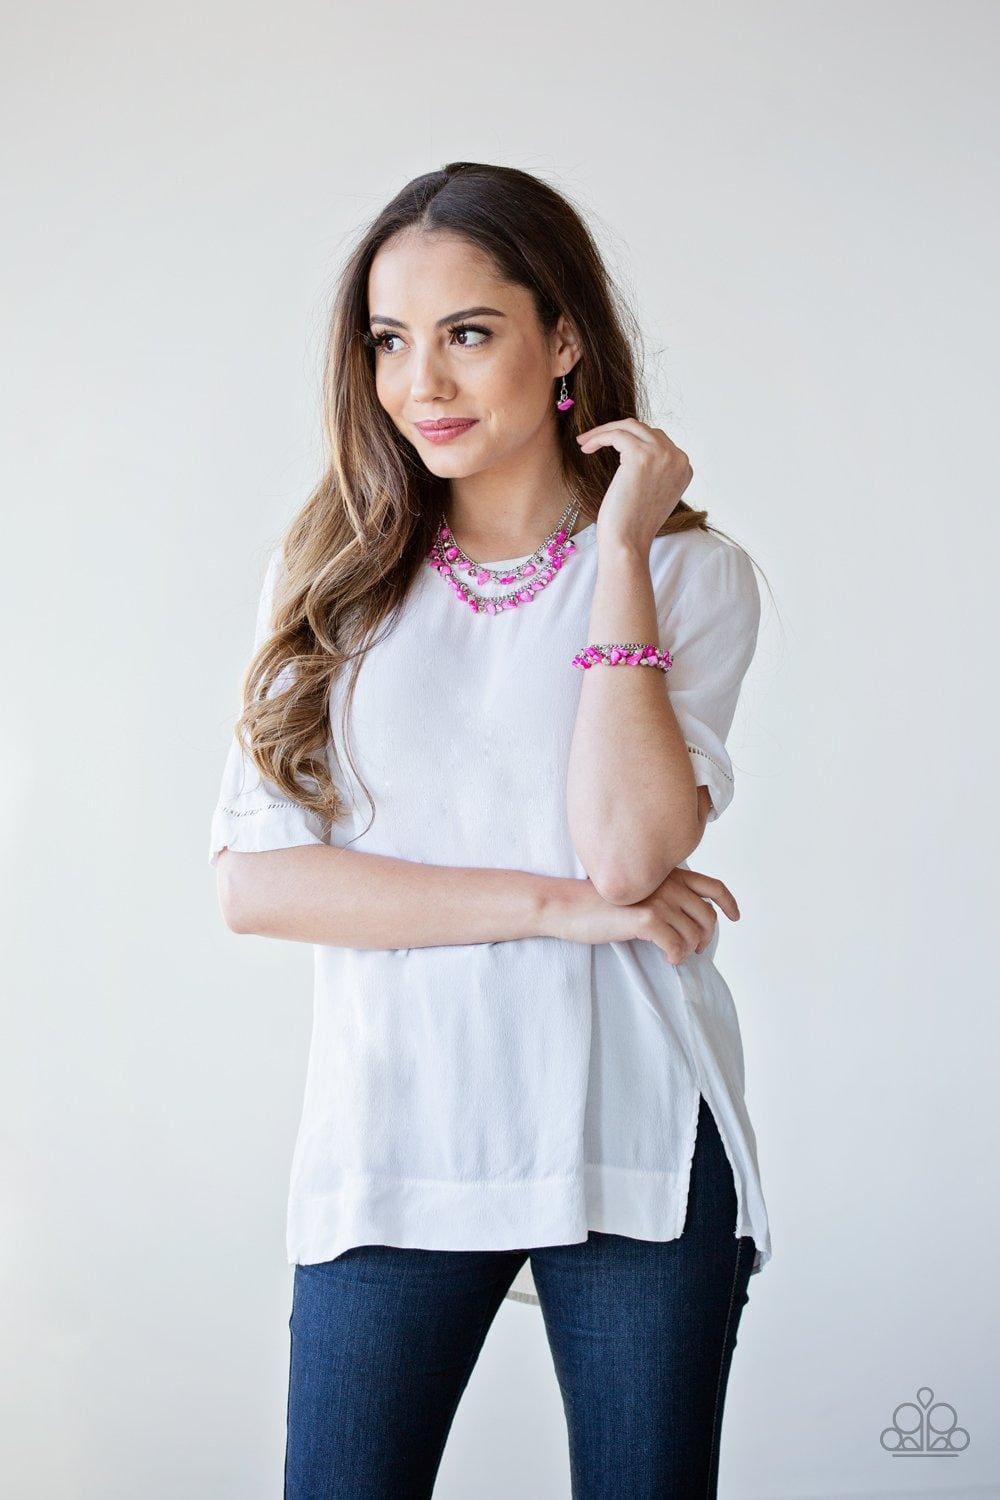 Paparazzi Accessories - Pebble Pioneer - Pink Necklace - Bling by JessieK